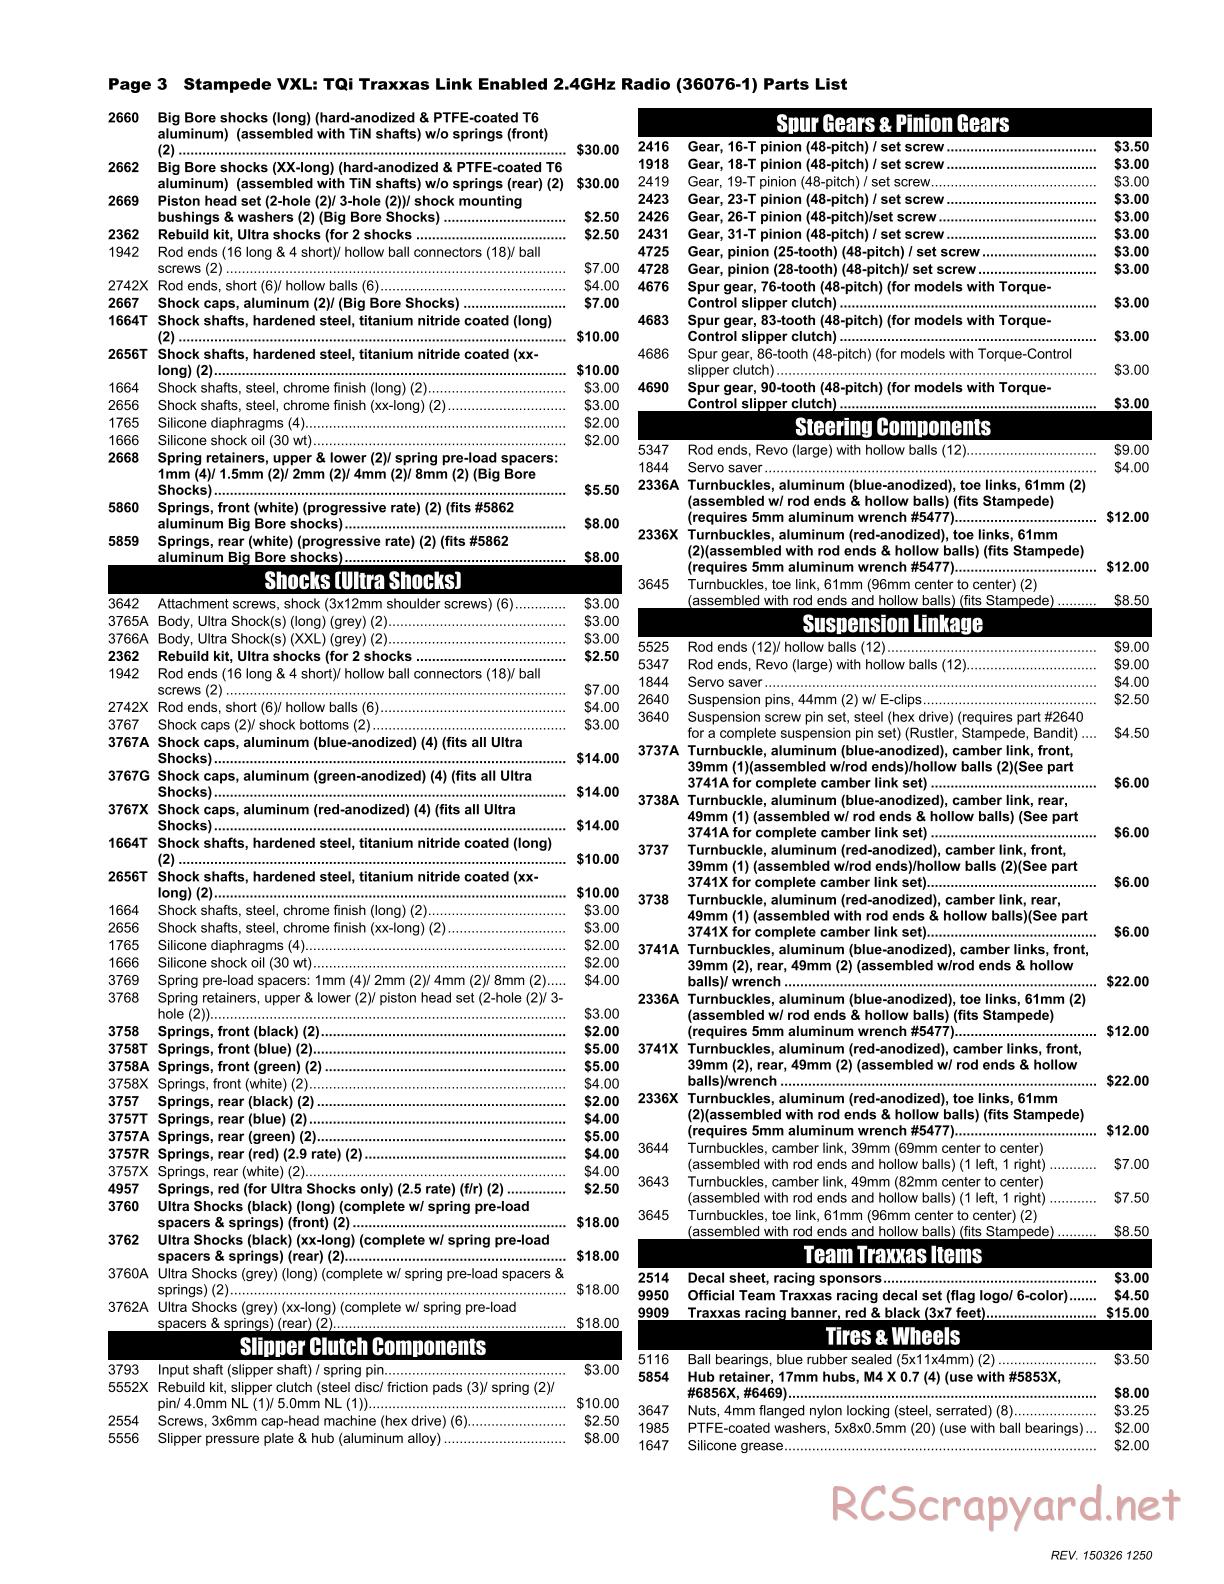 Traxxas - Stampede VXL - Parts List - Page 3